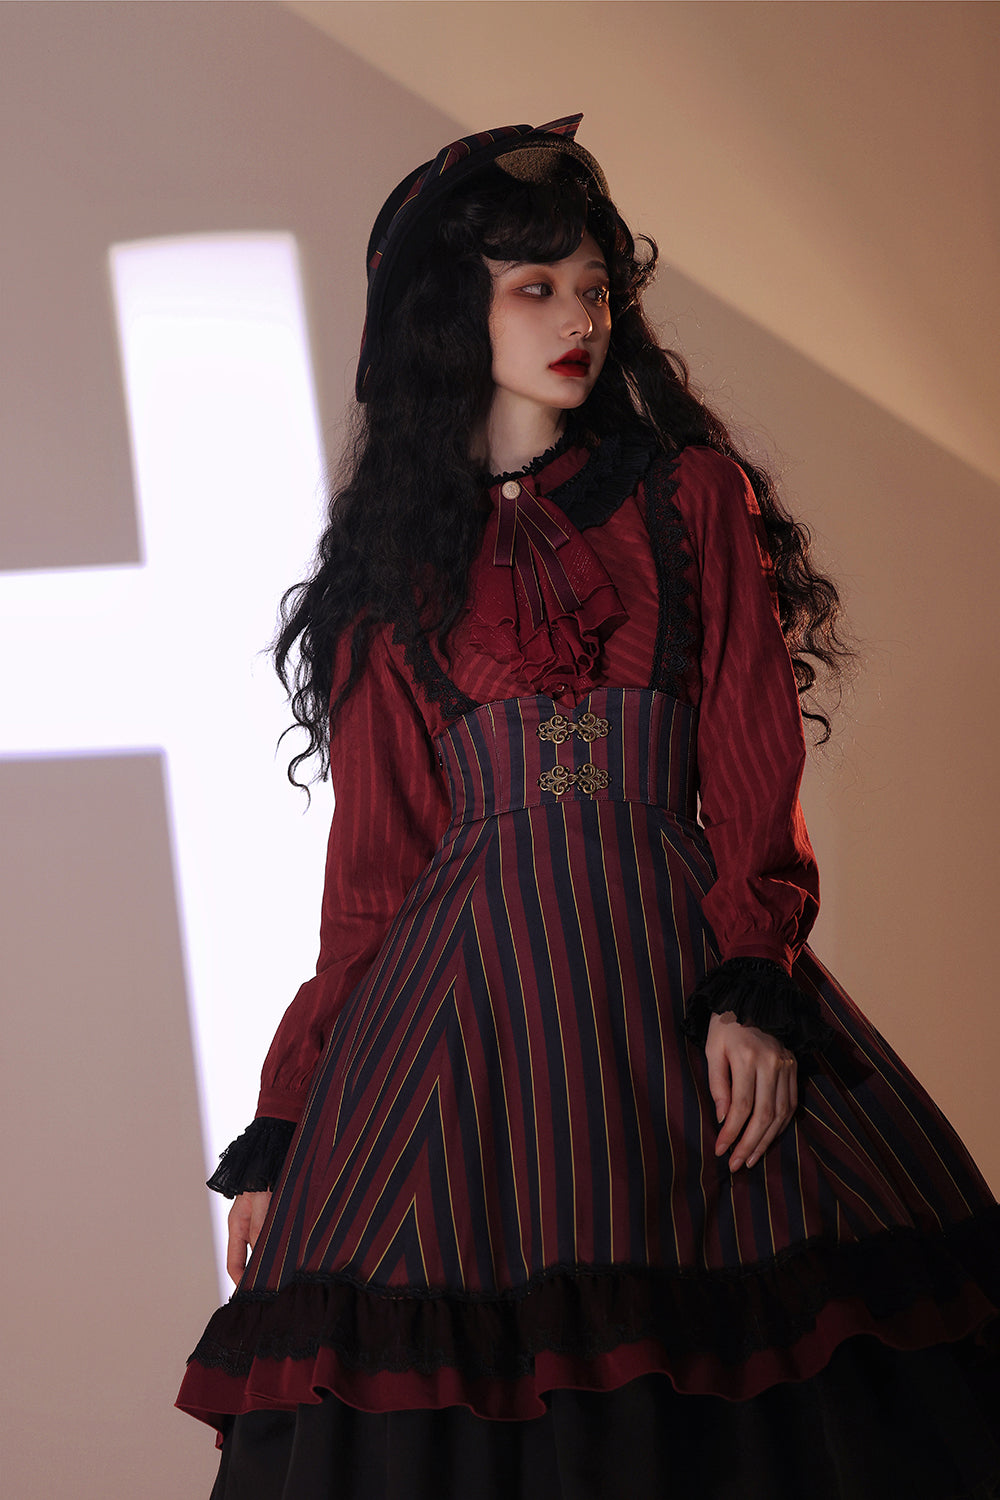 Elegant stand-up collar blouse of the feudal lord [20% off for combined purchases]